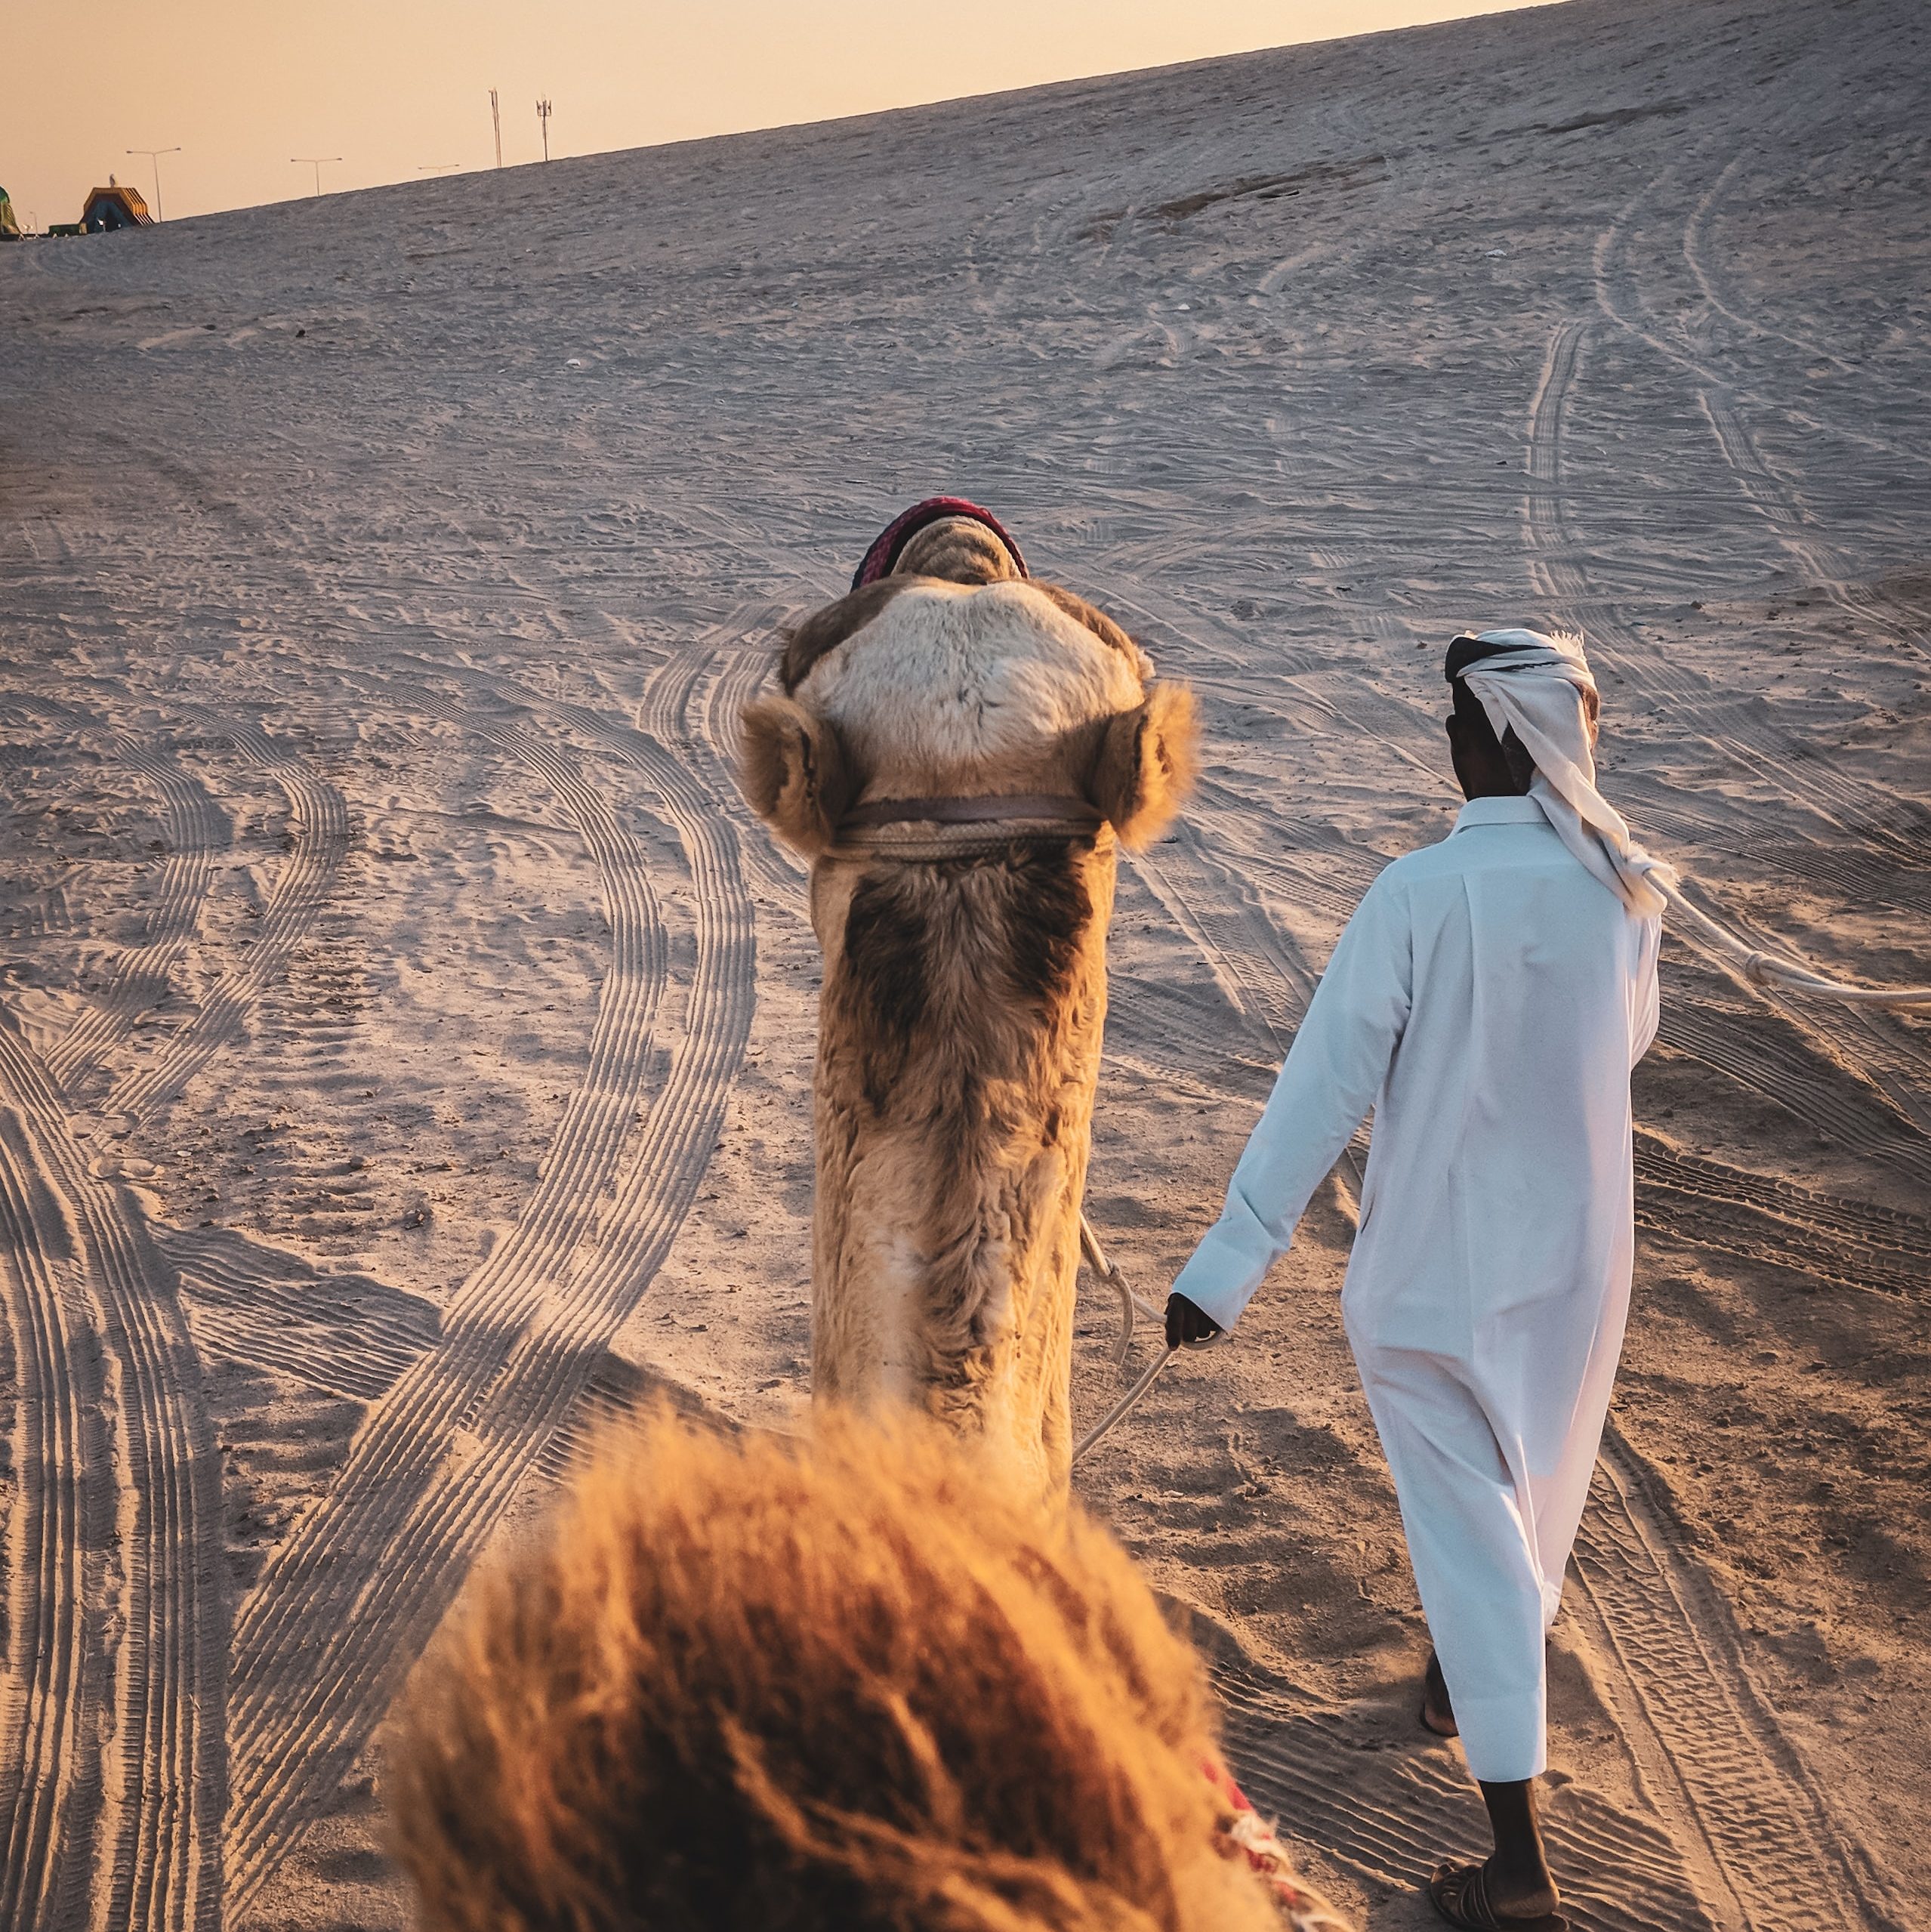 Enjoy a Wobbly Camel Ride on a Desert Safari | Things to Do with Kids